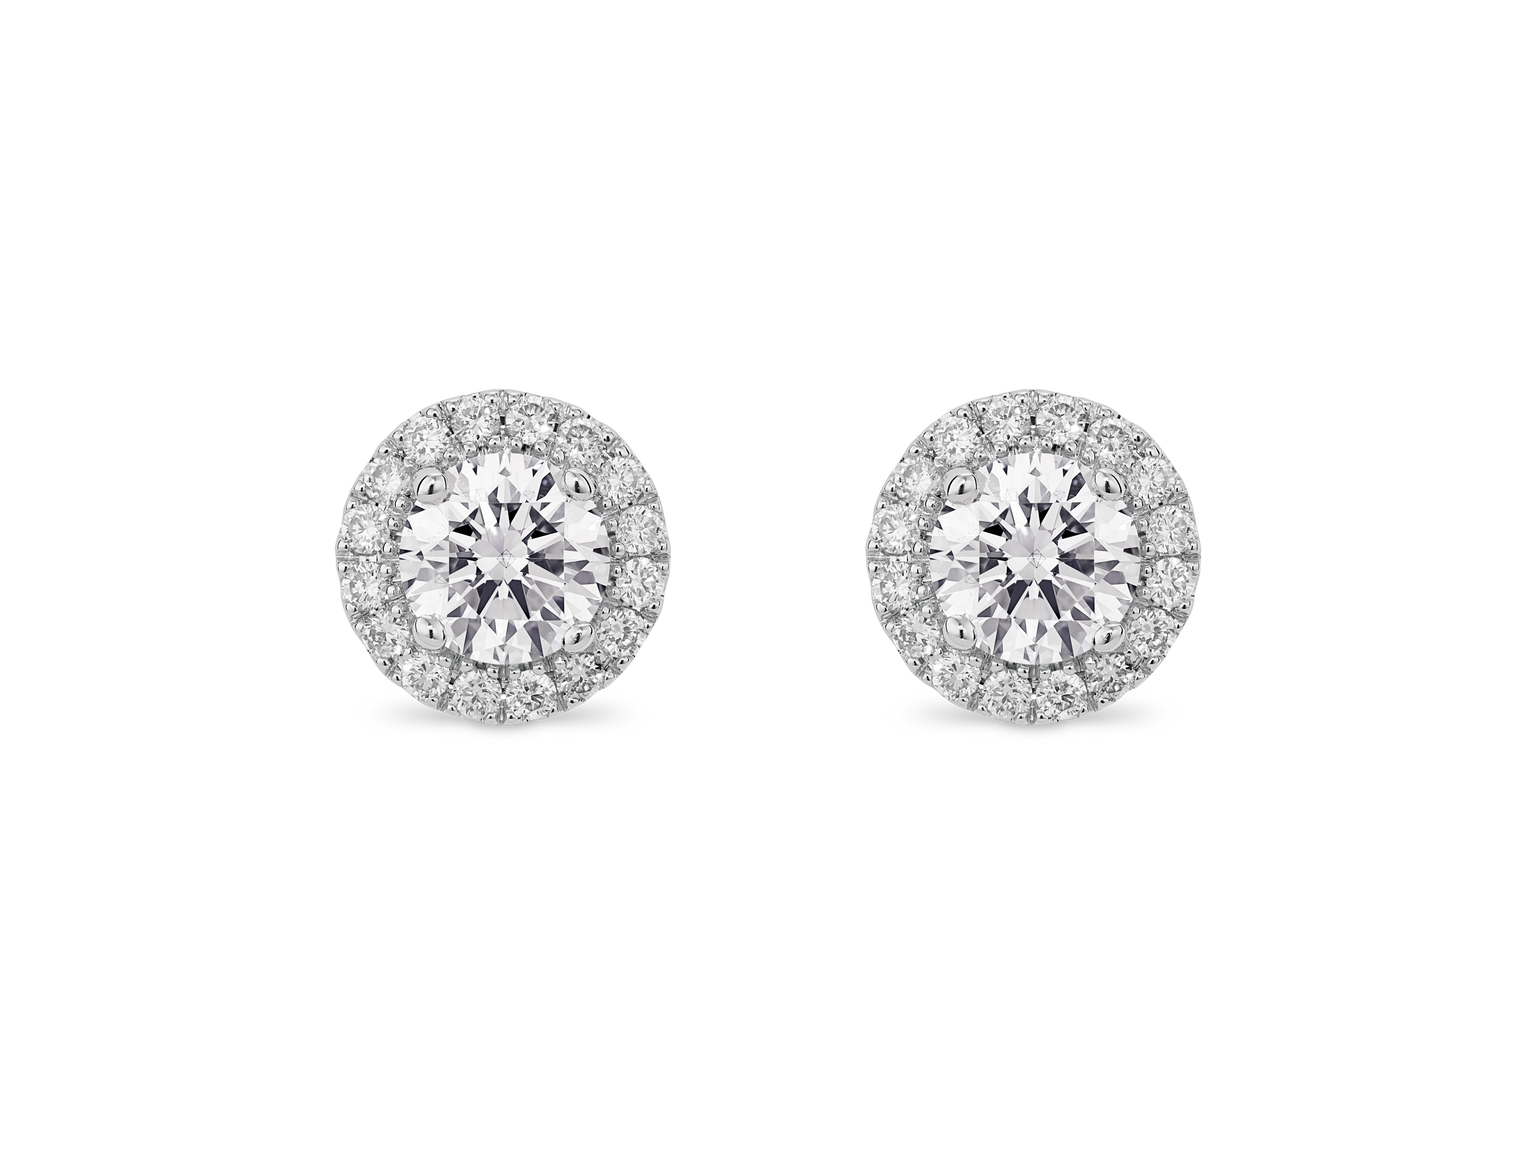 Front view of 1 carat total weight halo studs in 10k white gold